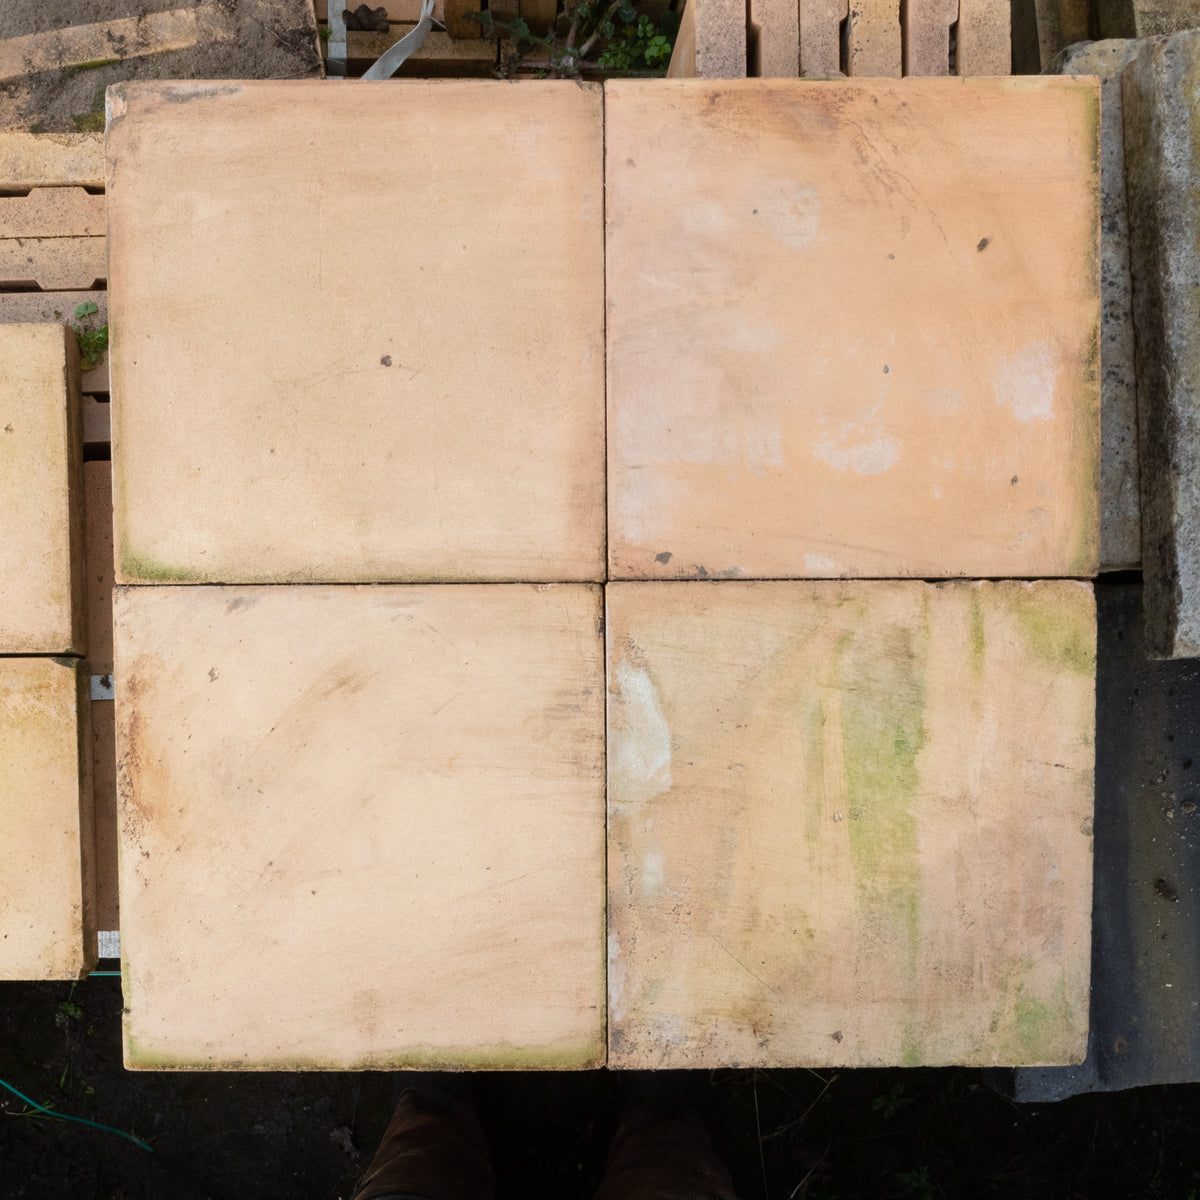 Reclaimed Buffed Terracotta Tiles | 12 square meter batch | The Architectural Forum